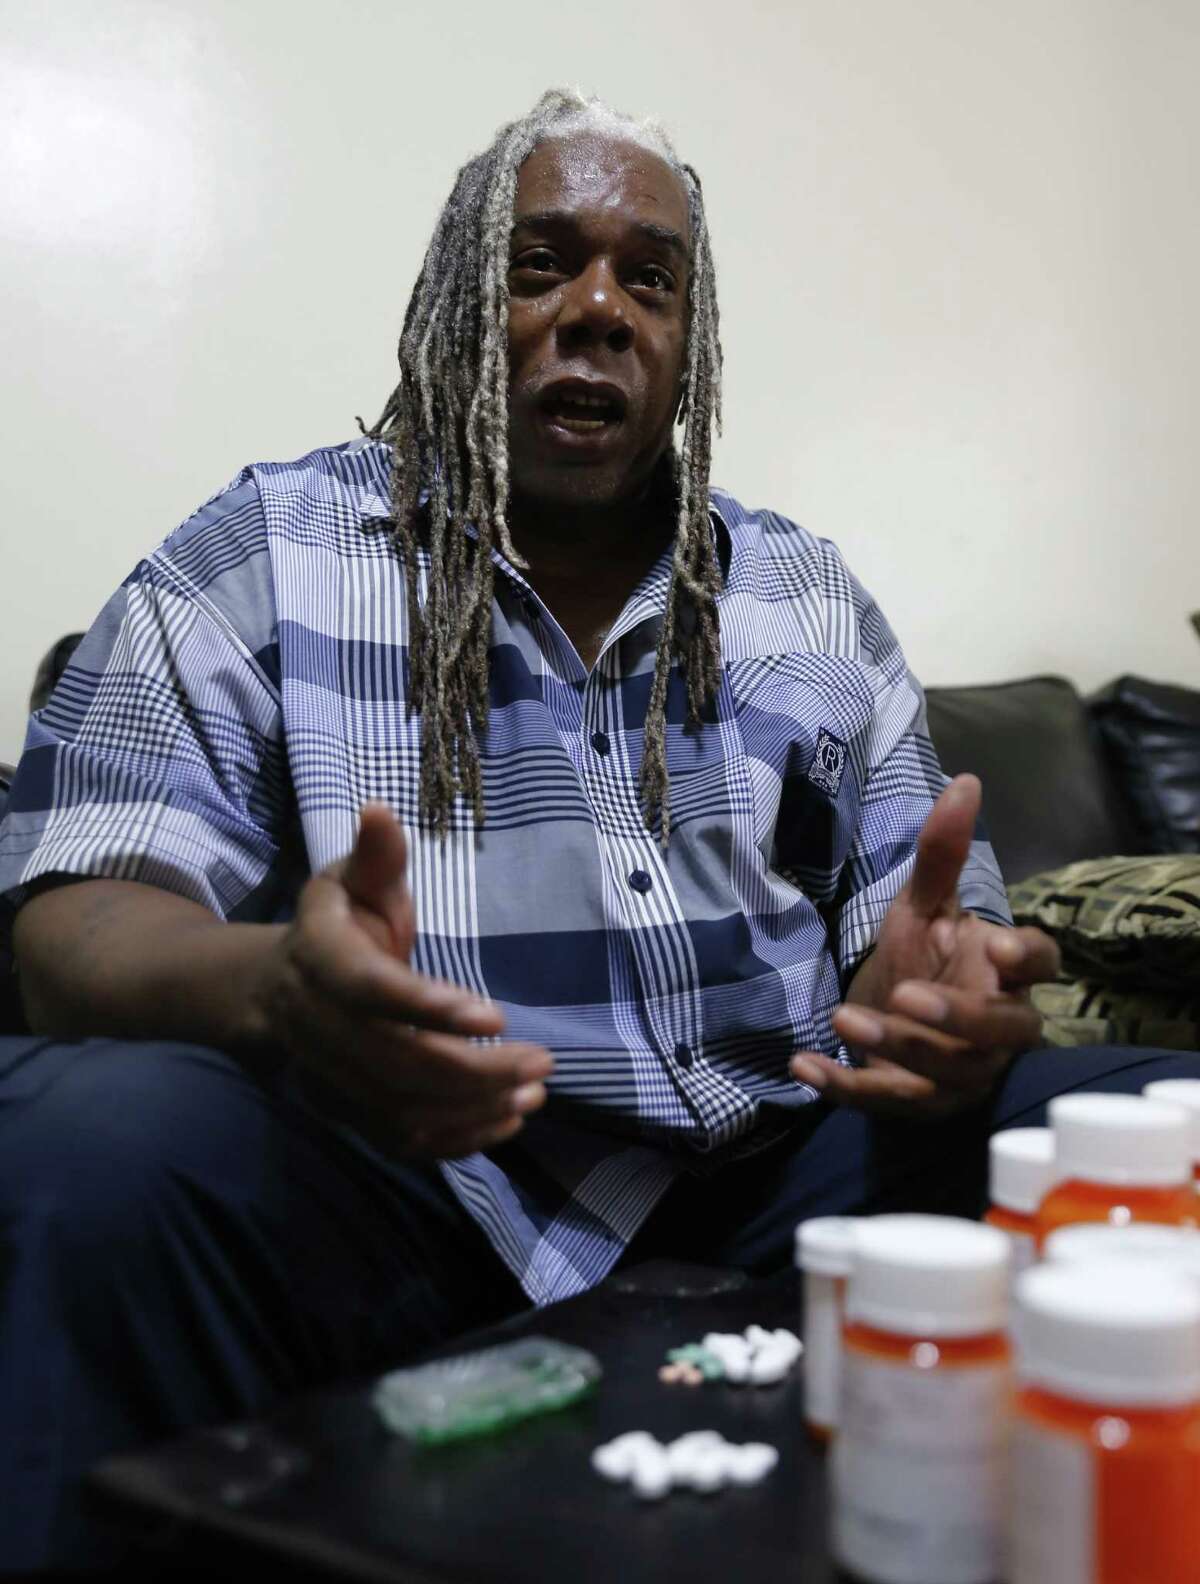 In this Monday, July 13, 2015 photo Earl Charles Williams Sr., 59, talks about the medication he must take for his diabetes in his Chicago home. Williams was uninsured for about a year before a county-run clinic helped him sign up for care under the Affordable Care Act. More than a dozen states that opted to expand Medicaid under the Affordable Care Act have seen enrollments surge way beyond projections, raising concerns that the added costs will strain their budgets when federal aid is scaled back starting in two years. (AP Photo/Christian K. Lee)